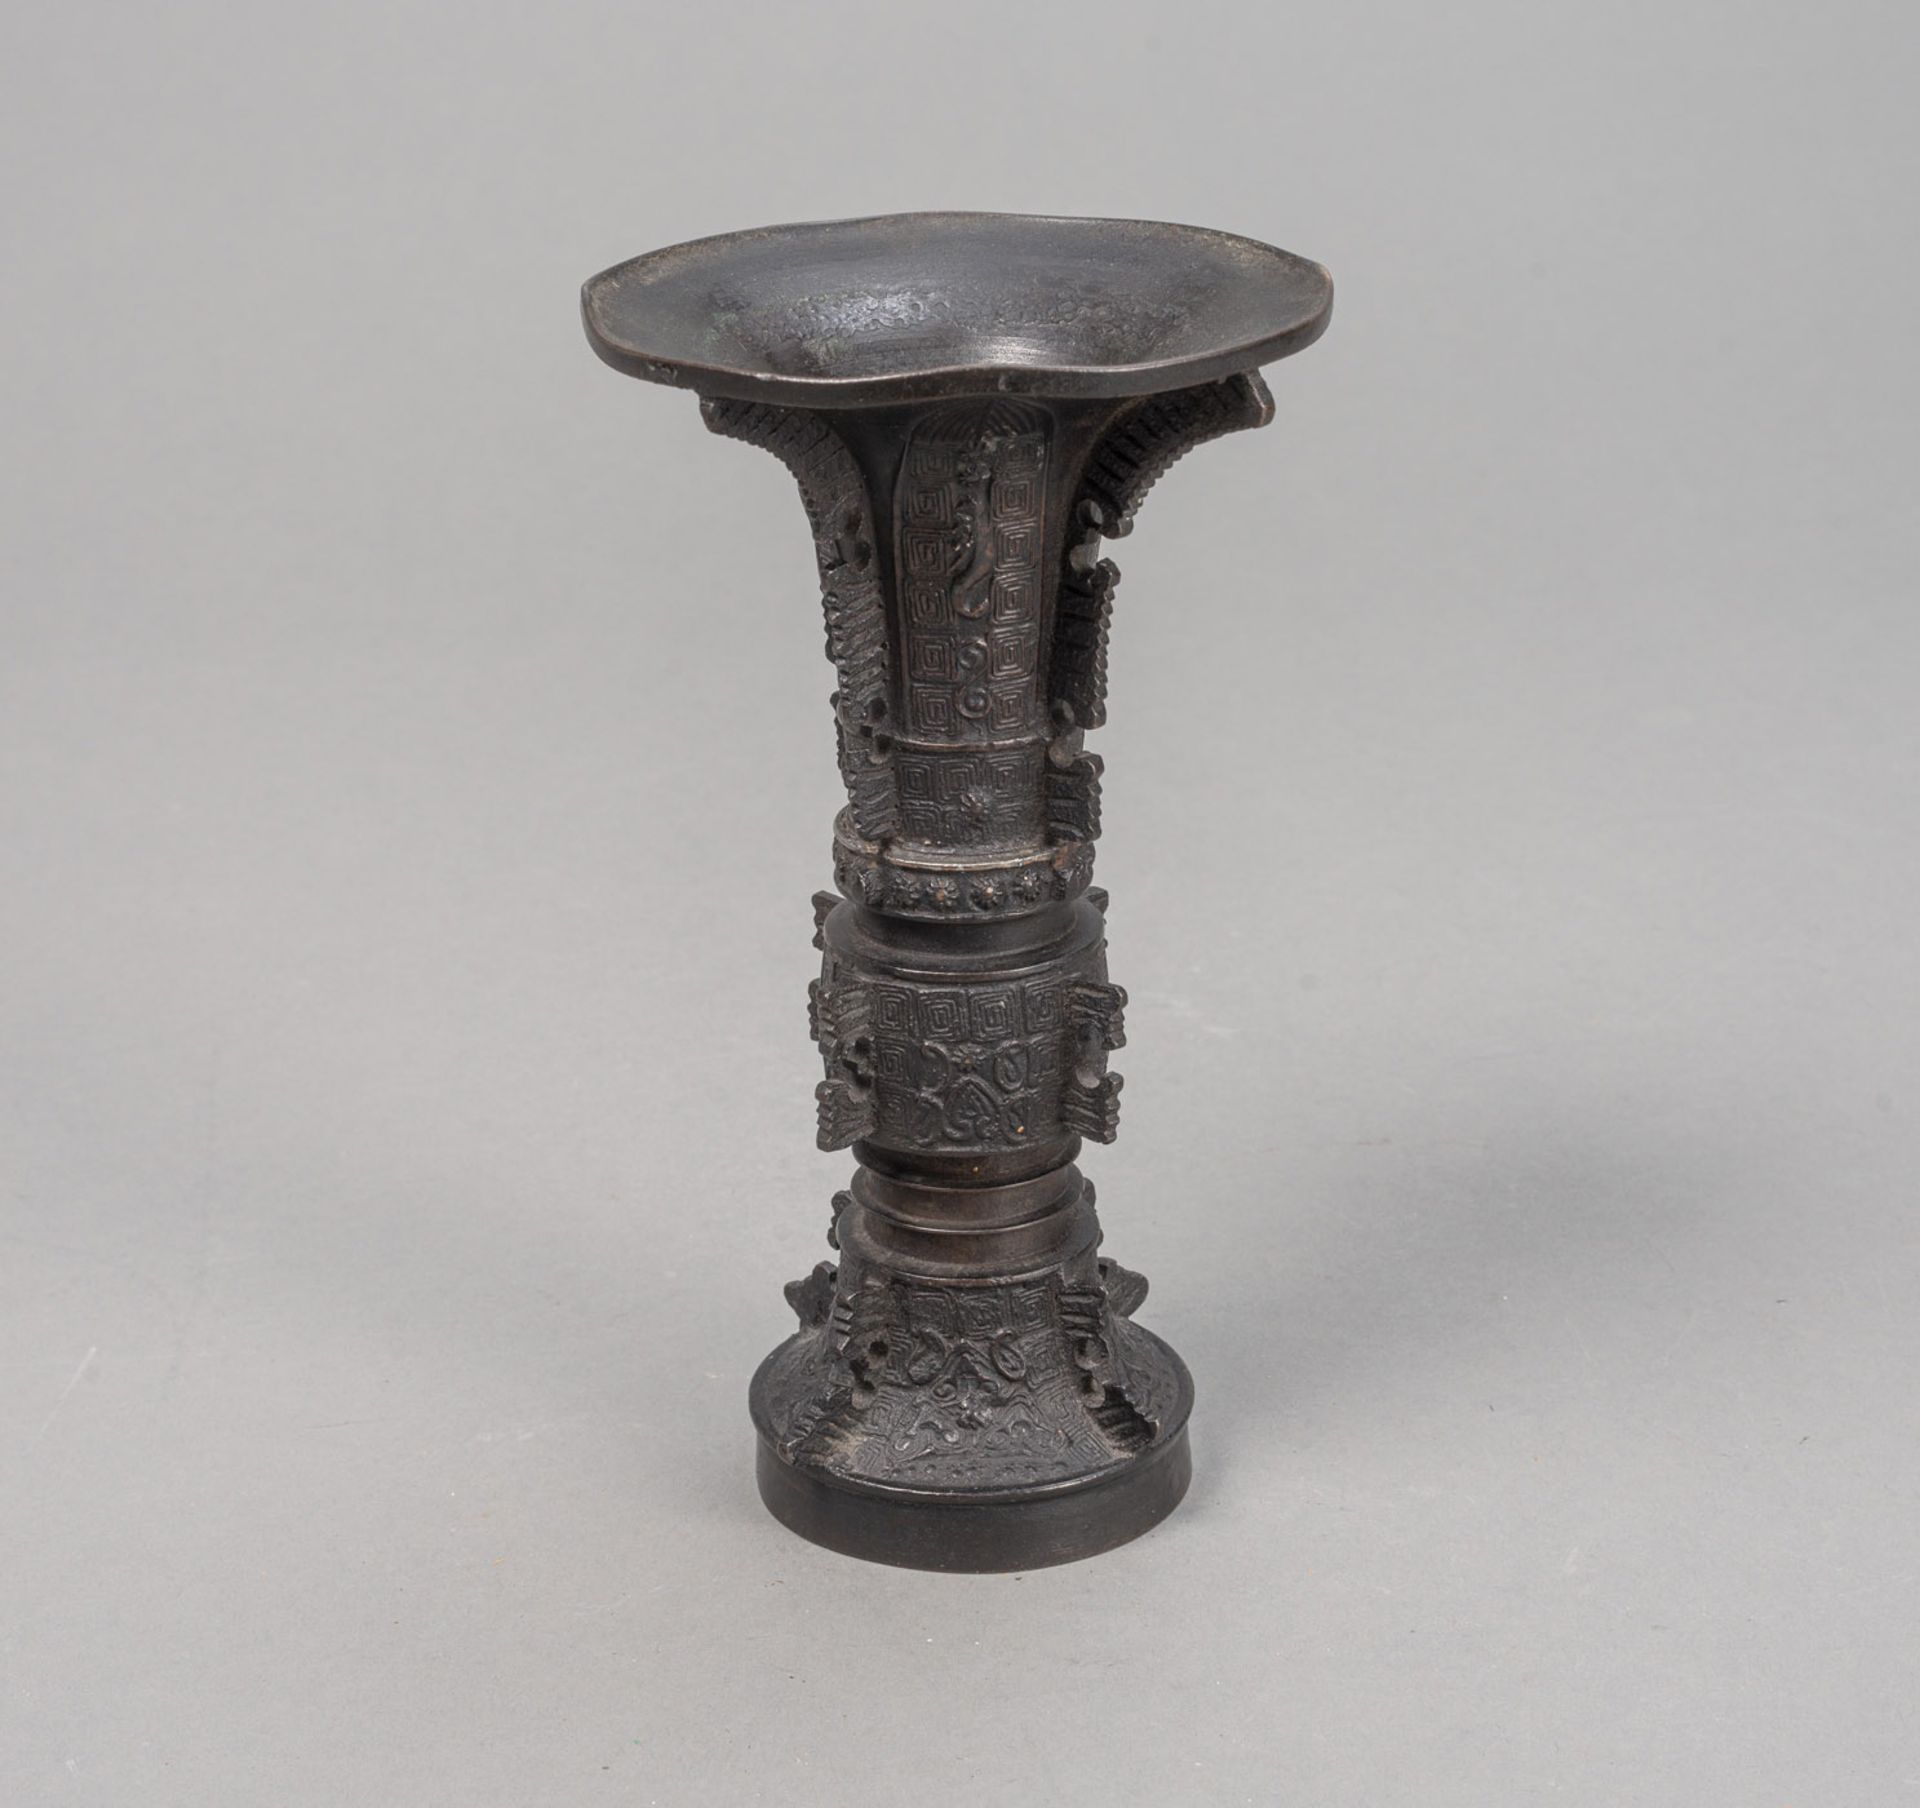 A 'GU'-SHAPED ARCHAISTIC BRONZE VASE - Image 3 of 4